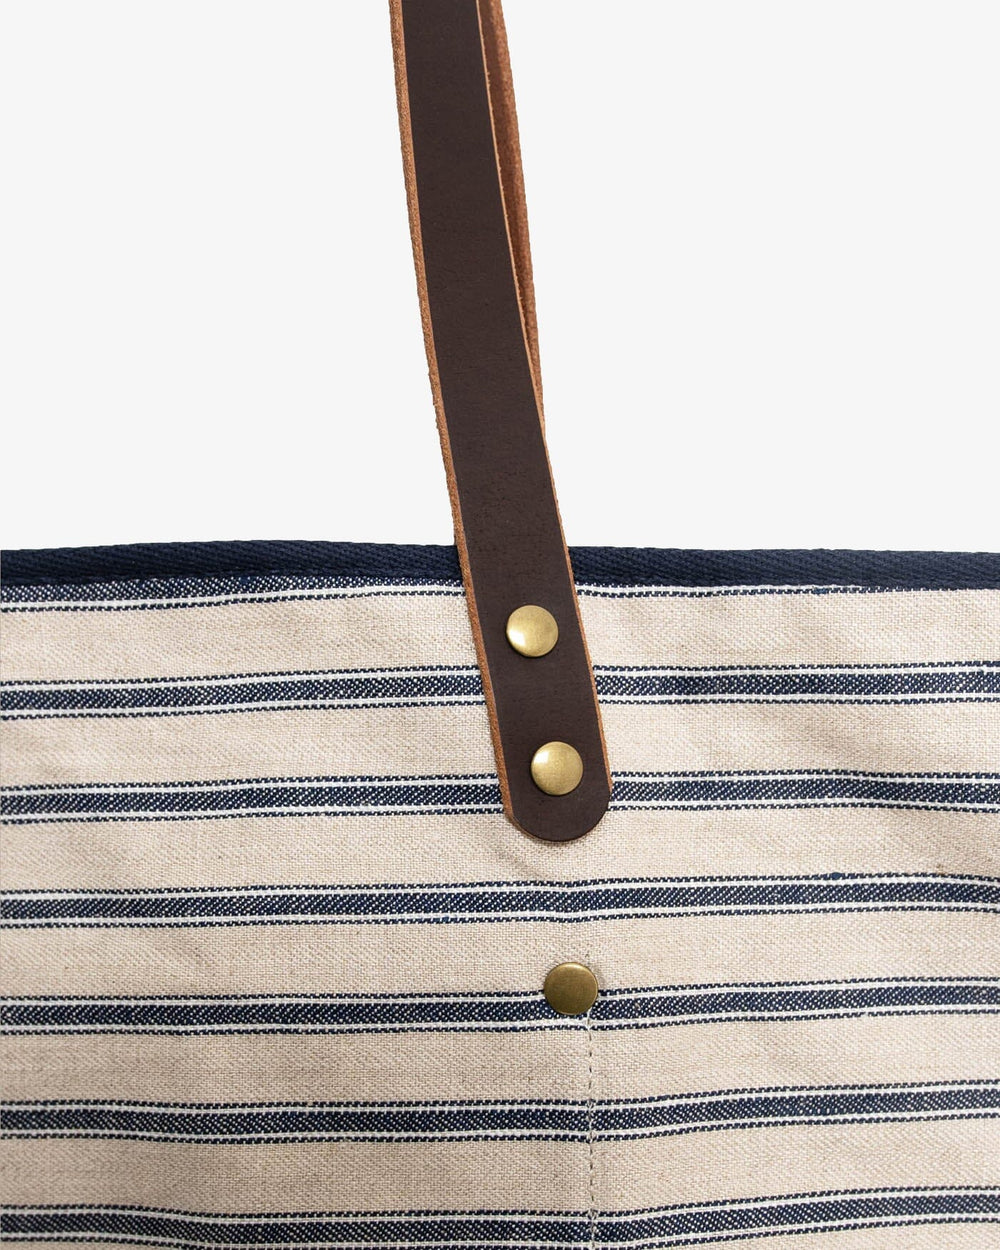 The deatil view of the All Day Stripe Tote by Southern Tide - Navy